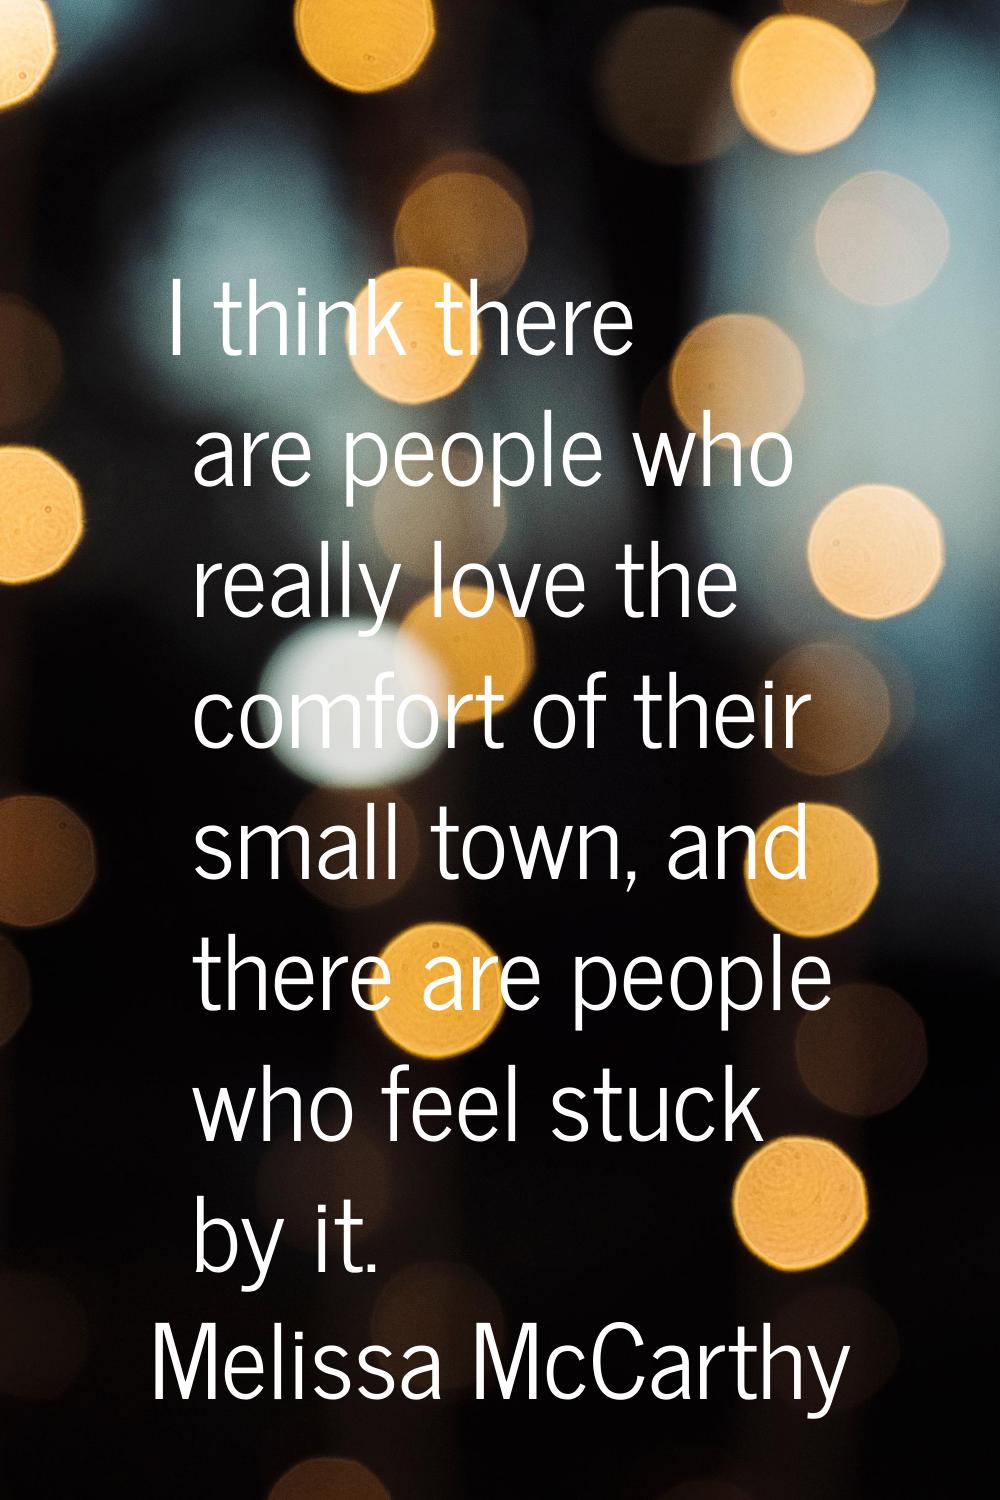 I think there are people who really love the comfort of their small town, and there are people who 